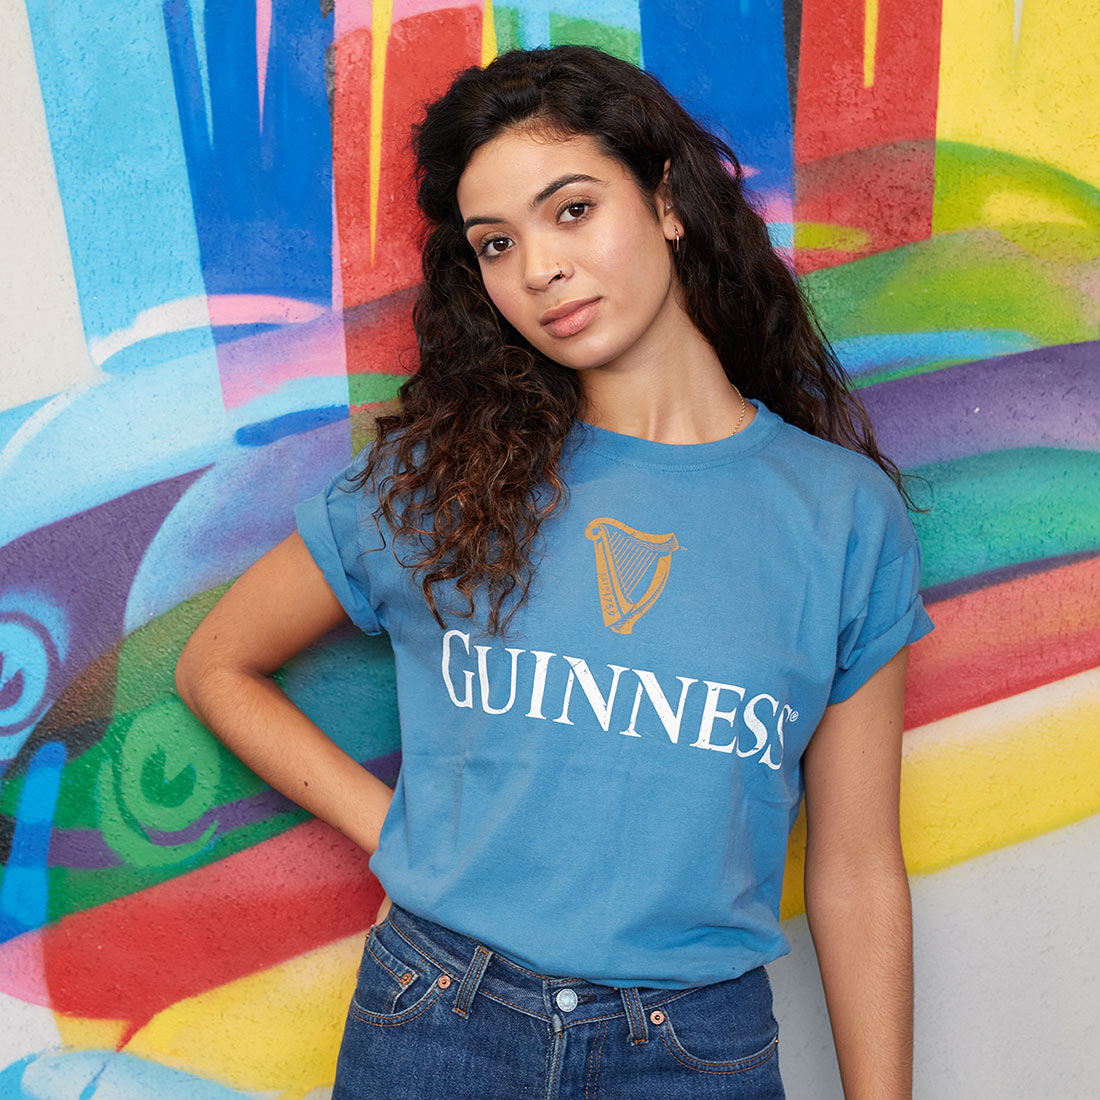 A woman sporting a Sky Blue Guinness Harp Premium T-Shirt poses confidently in front of a vibrant, colorful wall, representing the brand Guinness UK.